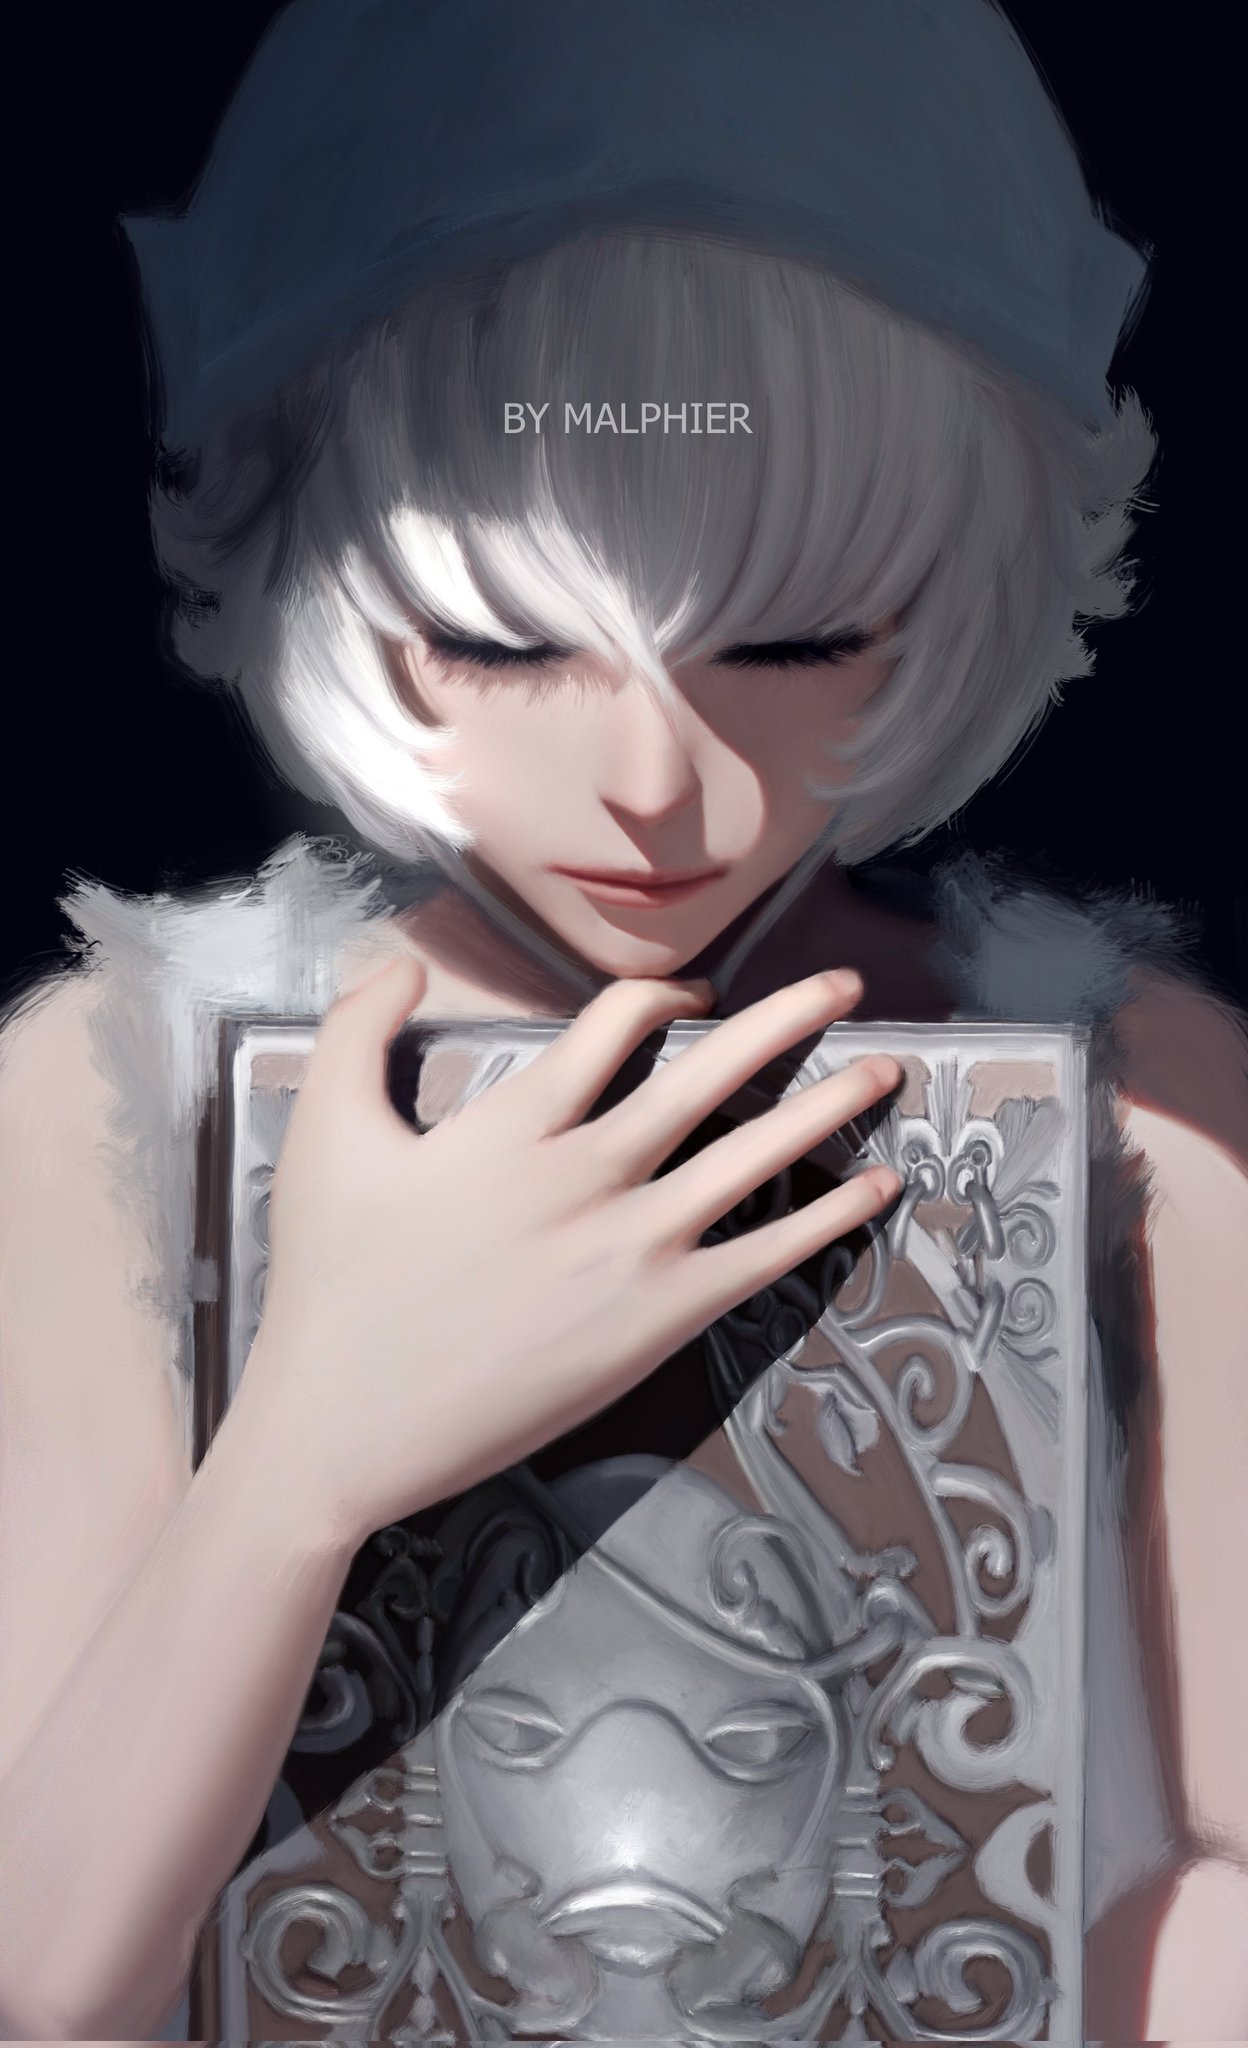 General 1248x2048 Kaine (NieR) NieR Replicant NieR Reincarnation Caucasian white hair short hair artwork Realism video games video game characters Square Enix Malphier Platinum games books video game girls face closed eyes closed mouth Nier: Automata fingers portrait display hands frontal view